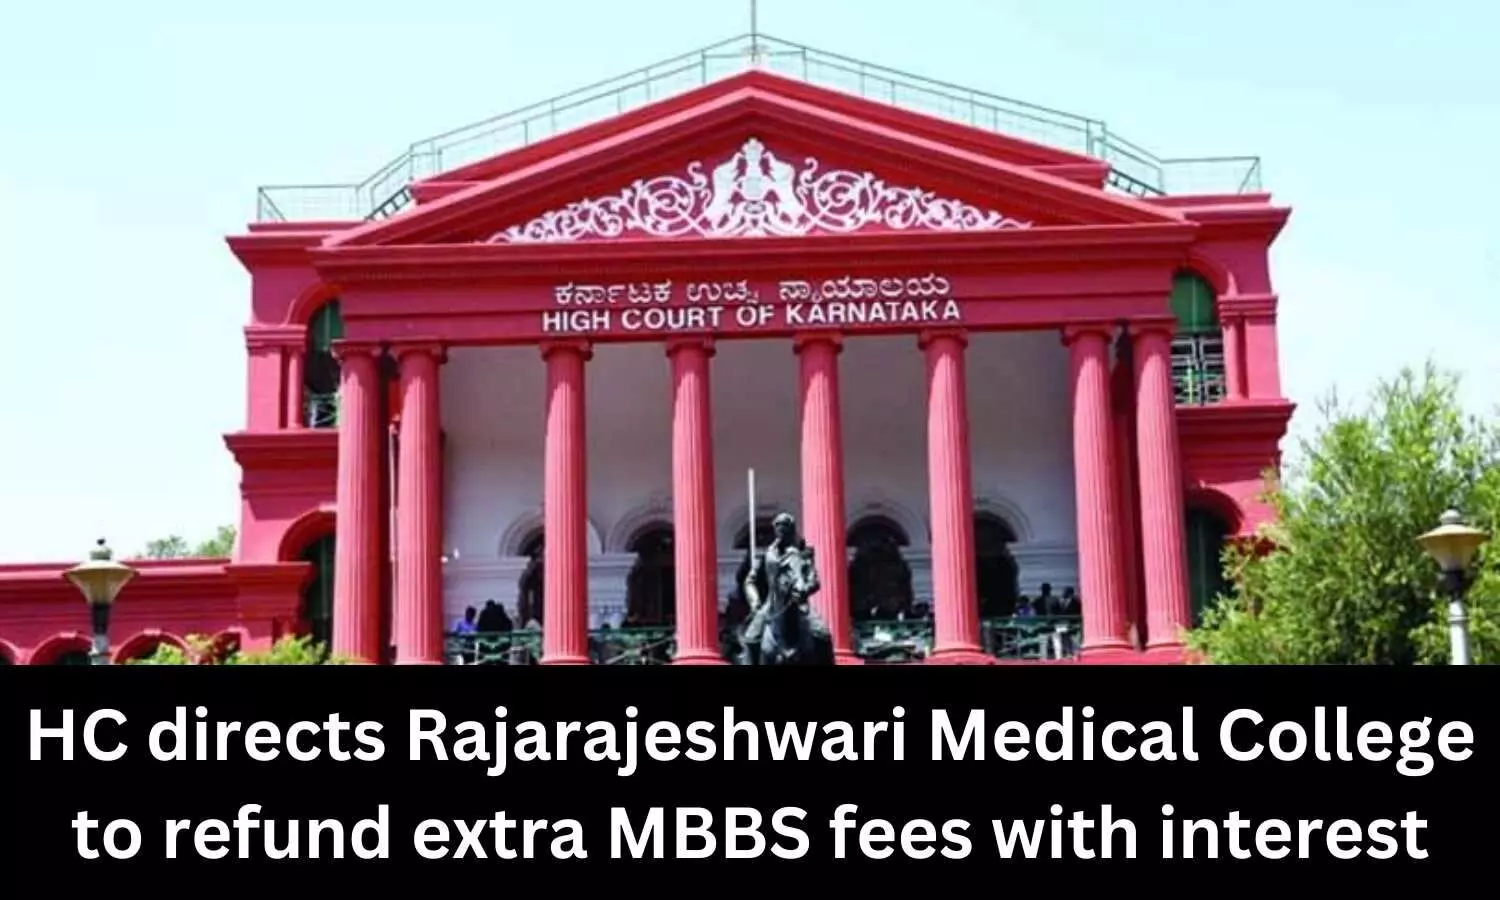 Refund extra MBBS fees collected from students with interest: Karnataka HC directs Rajarajeshwari Medical College